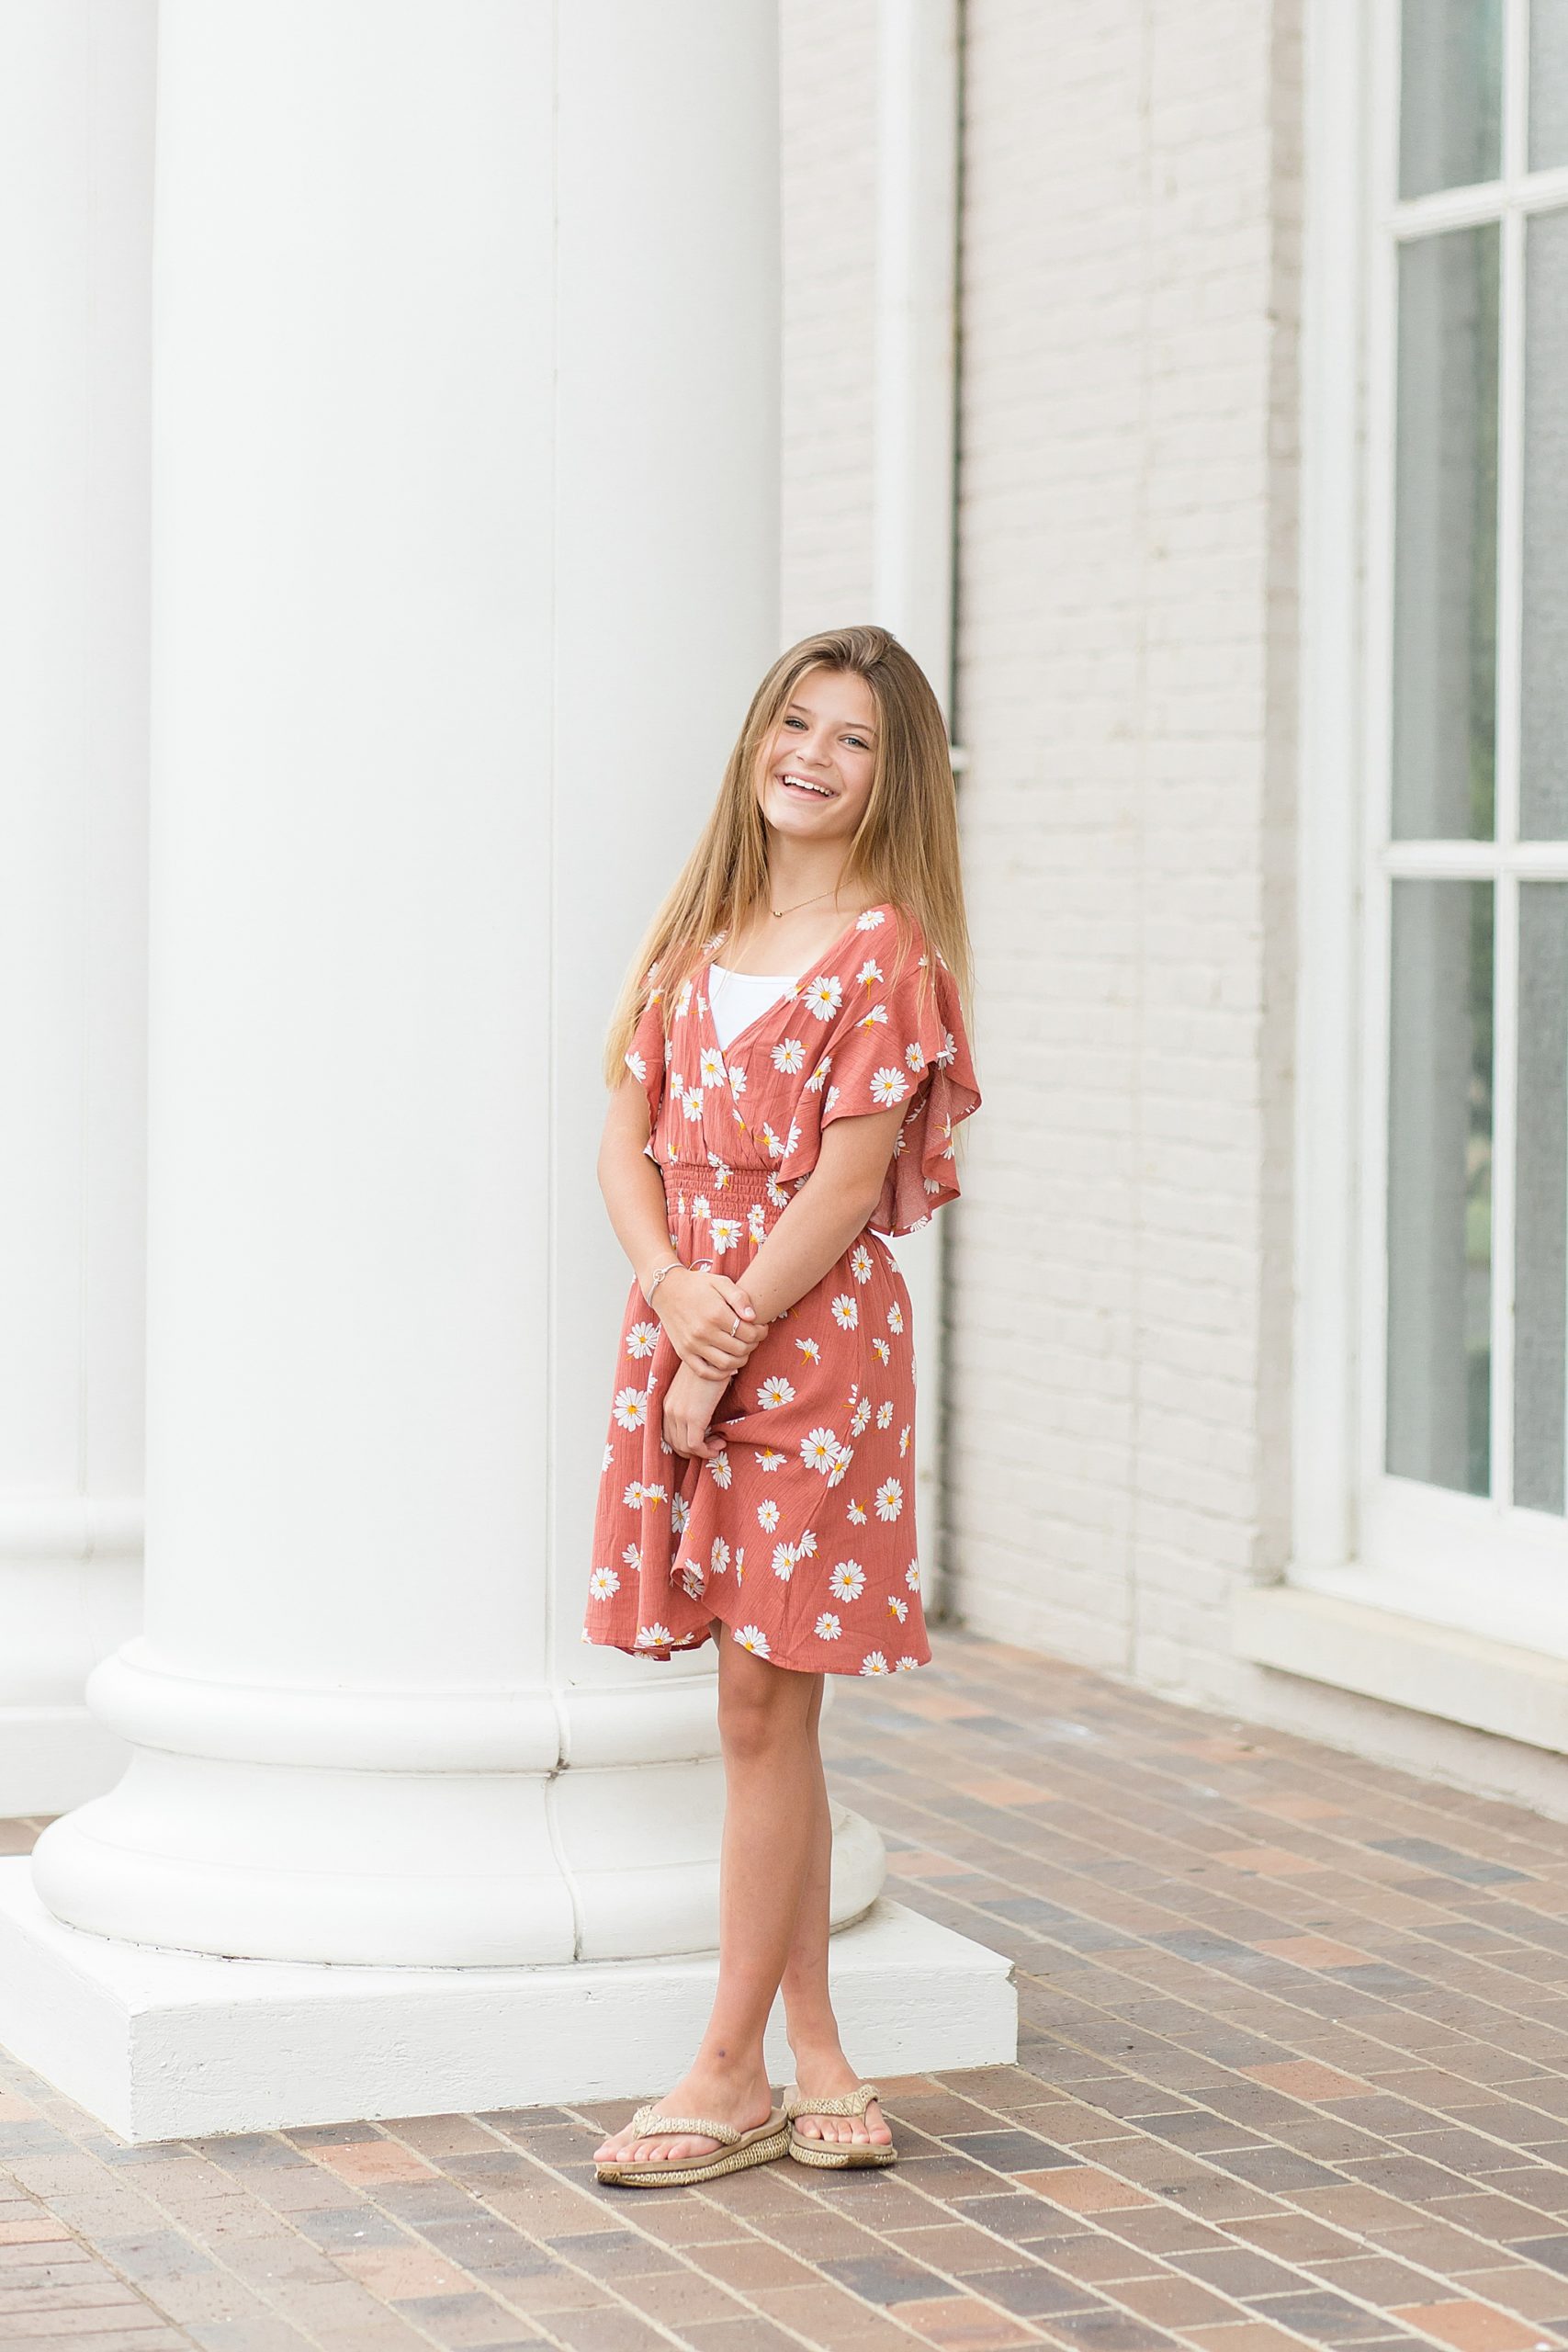 teenager in floral dress smiles by pillar